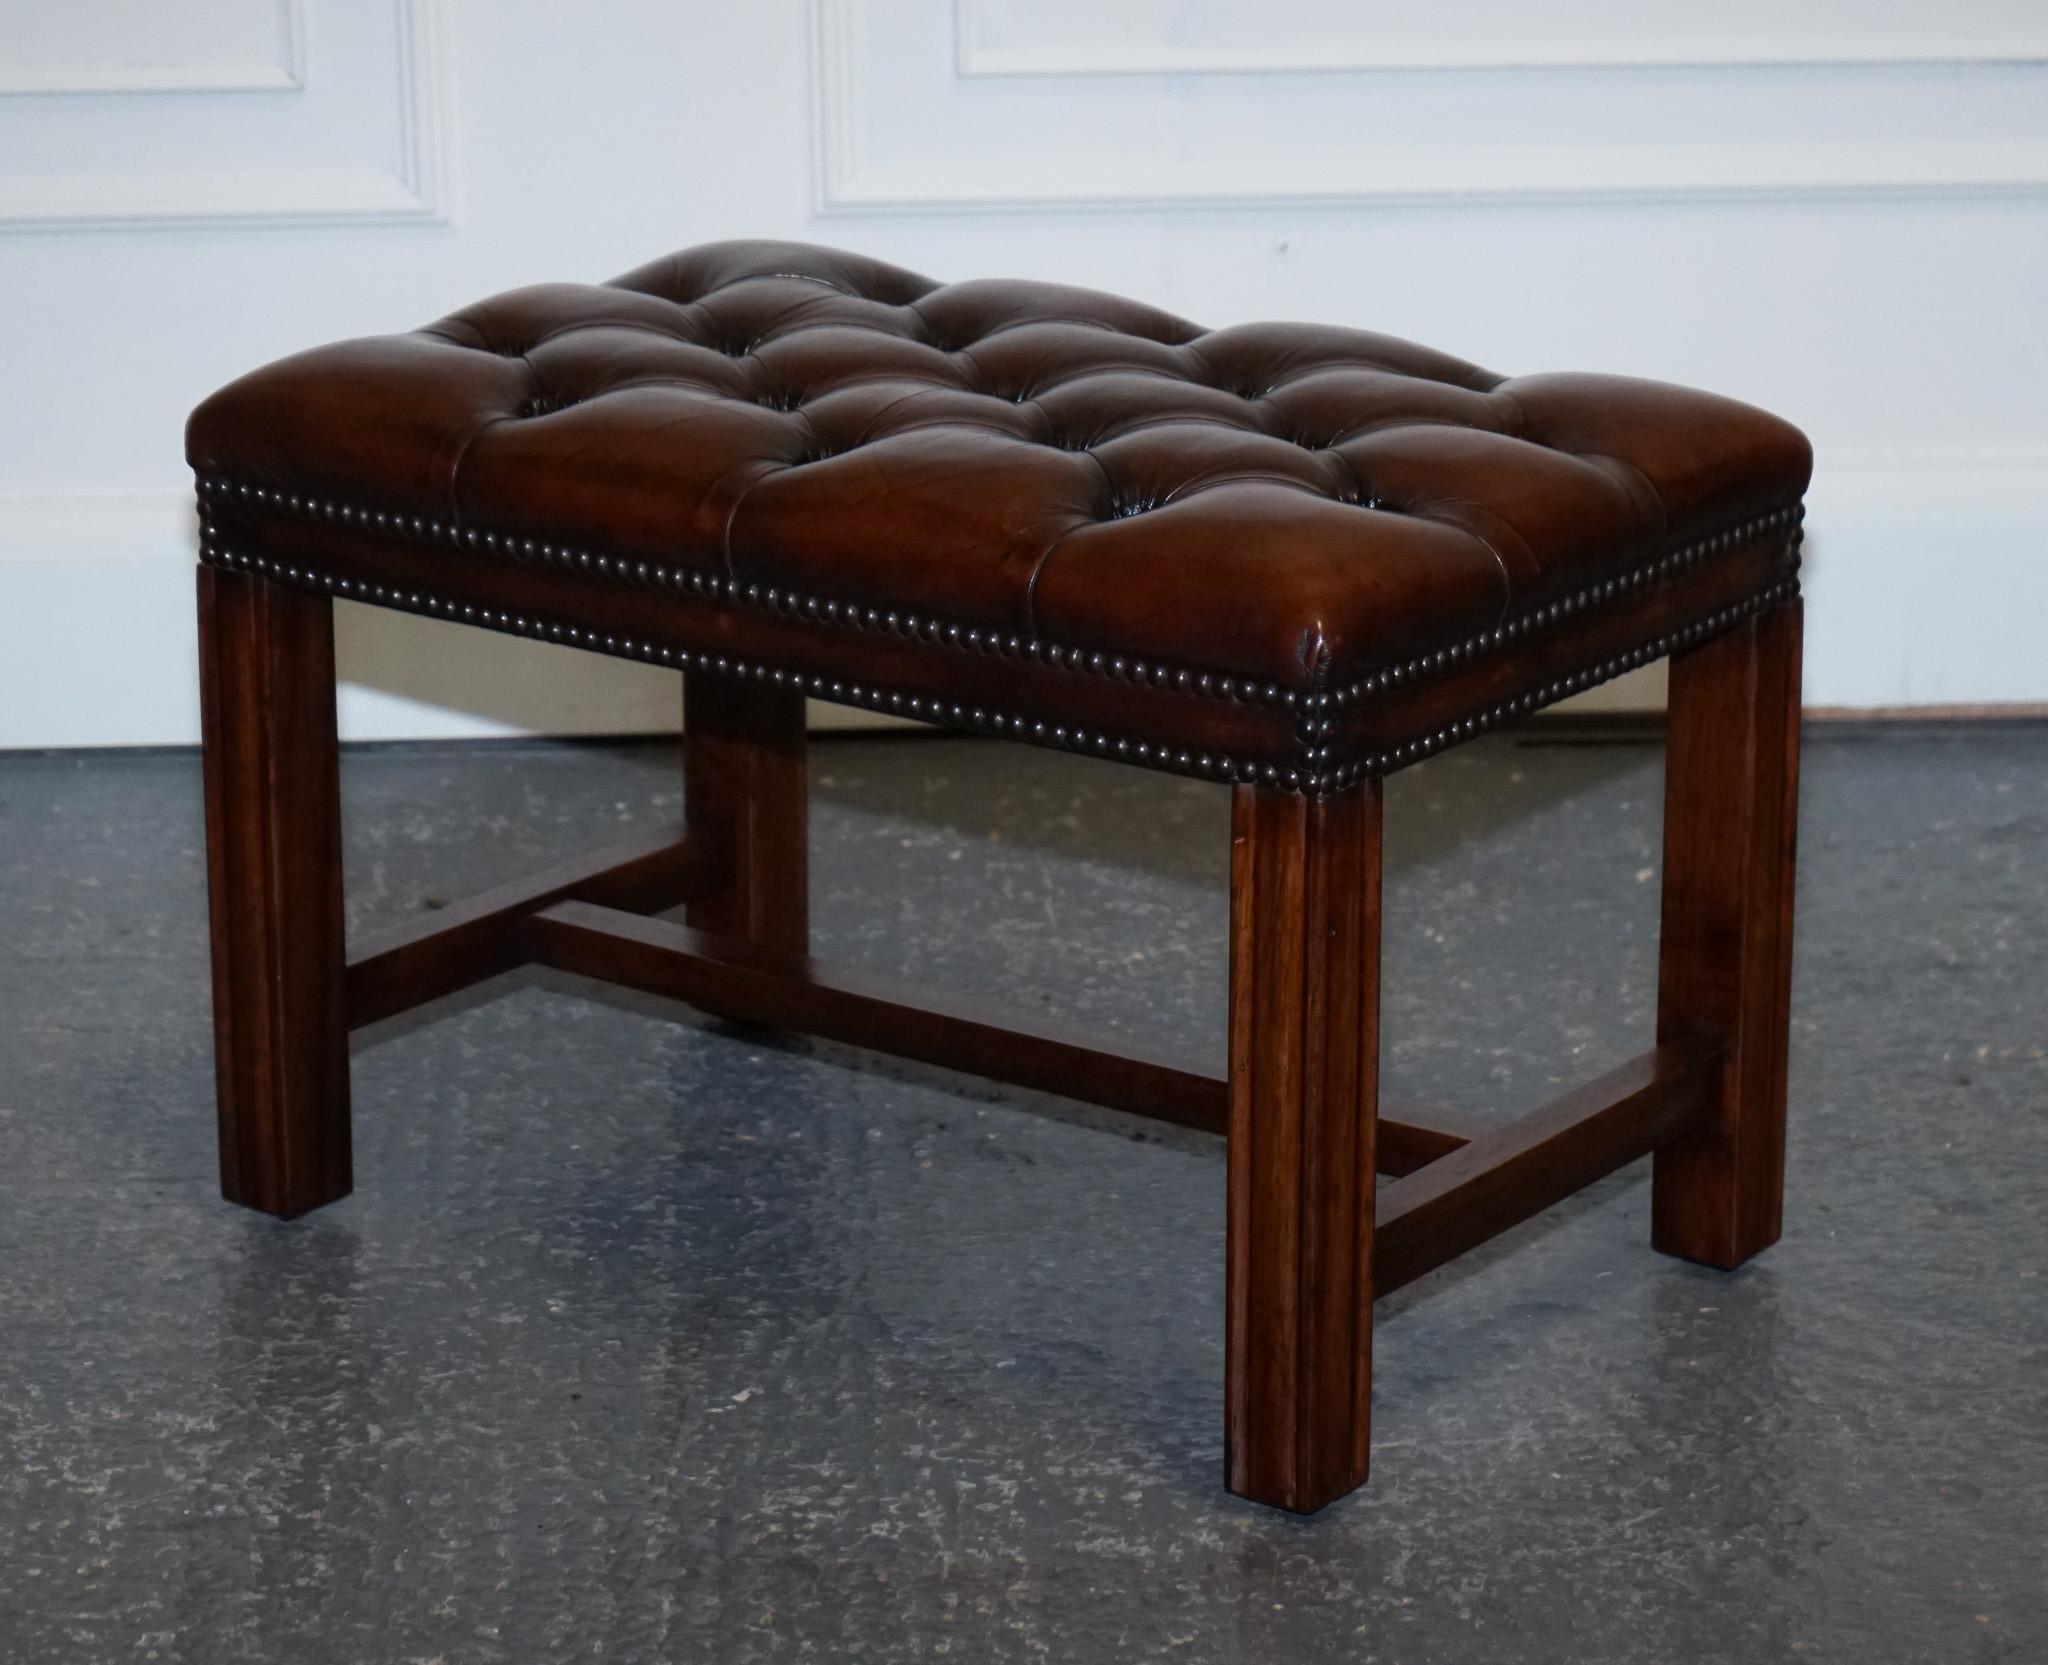 Georgian VINTAGE RESTORED CHESTERFiELD HAND DYED BROWN LEATHER TUFFED FOOTSTOOL (2/2) For Sale